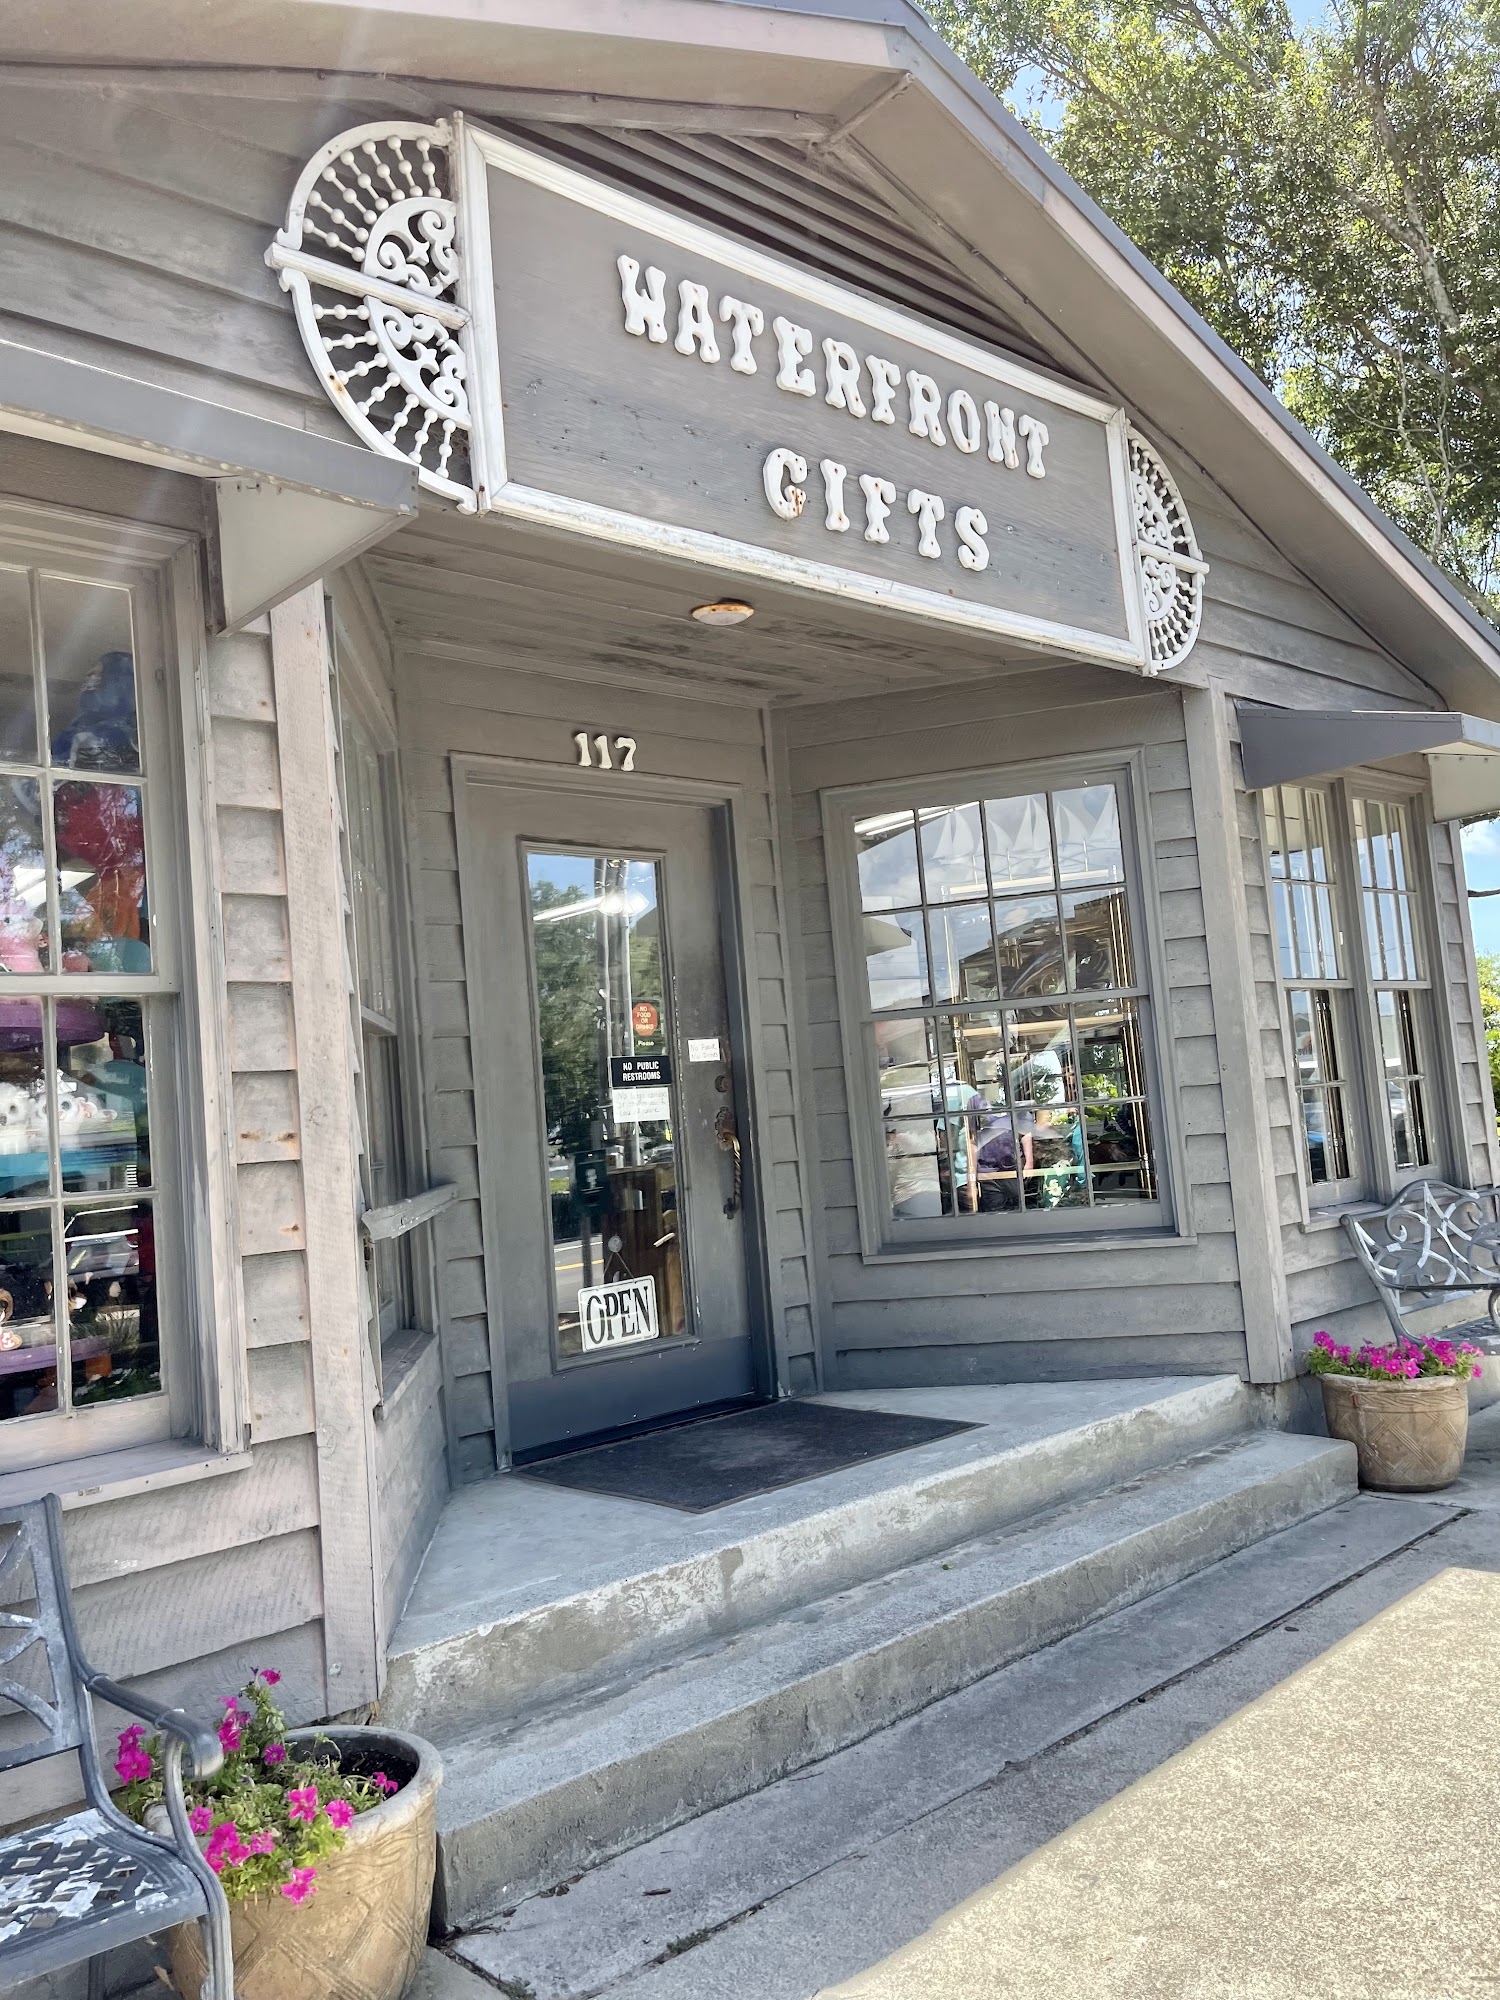 Waterfront Gifts & Antiques